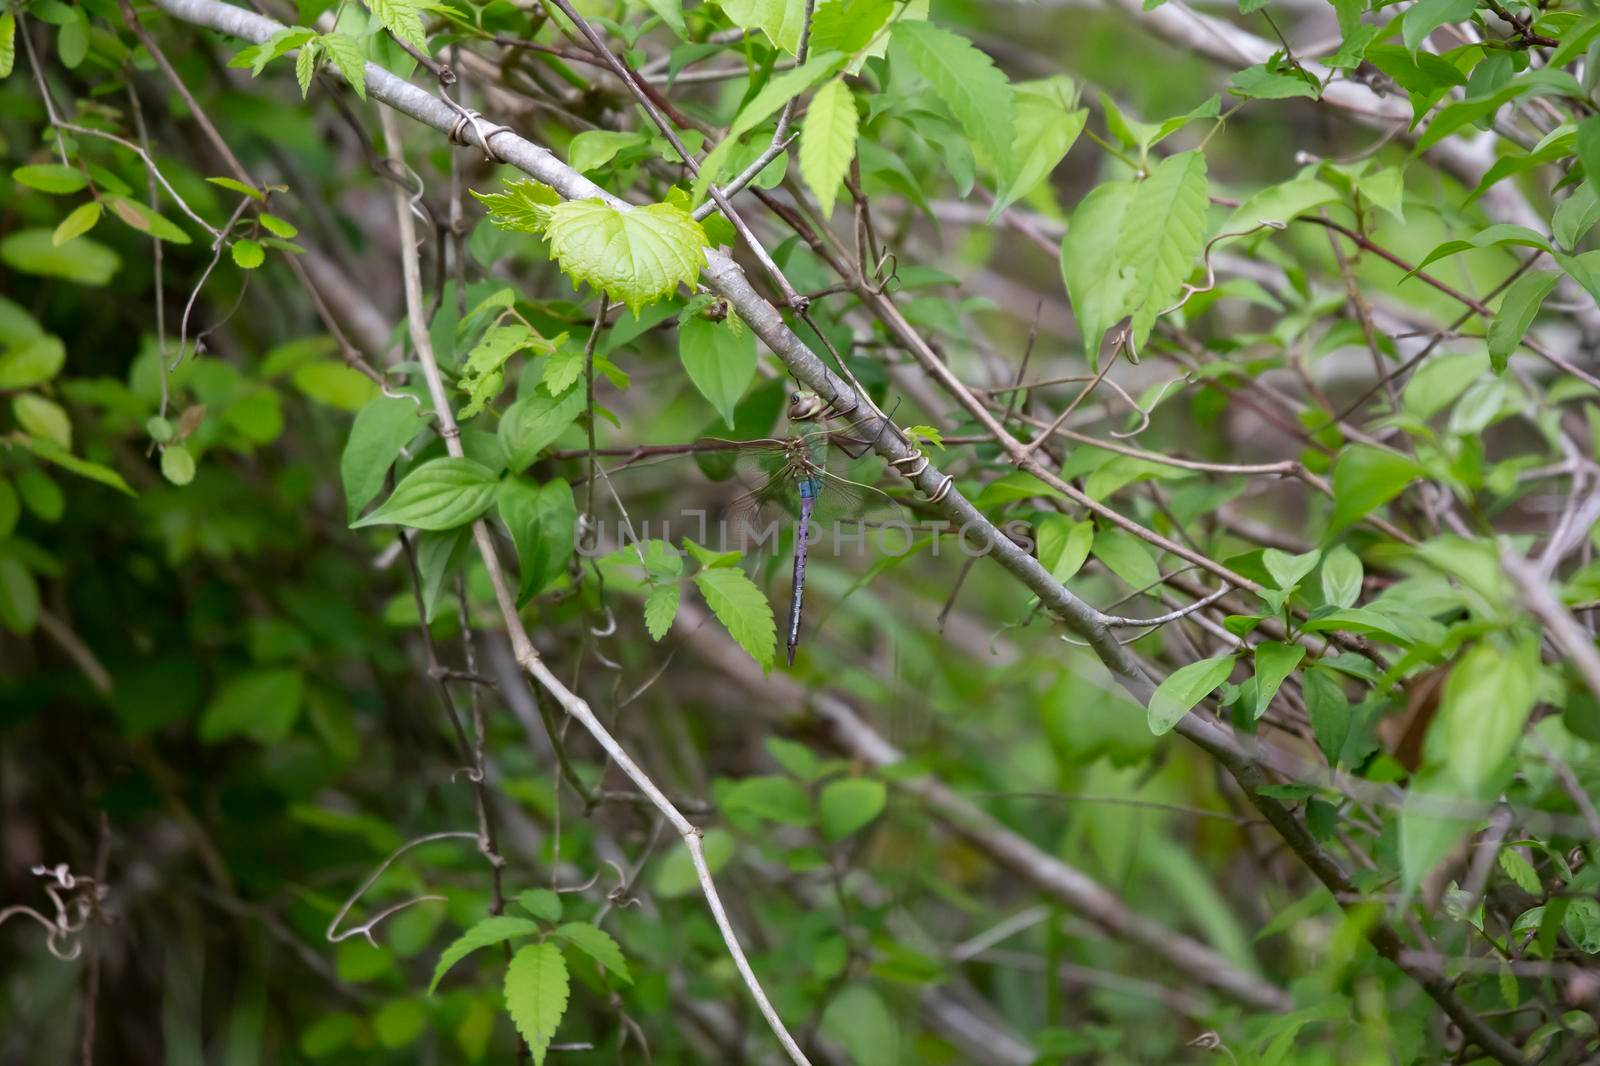 Common green darner (Anax junius) hanging from a limb